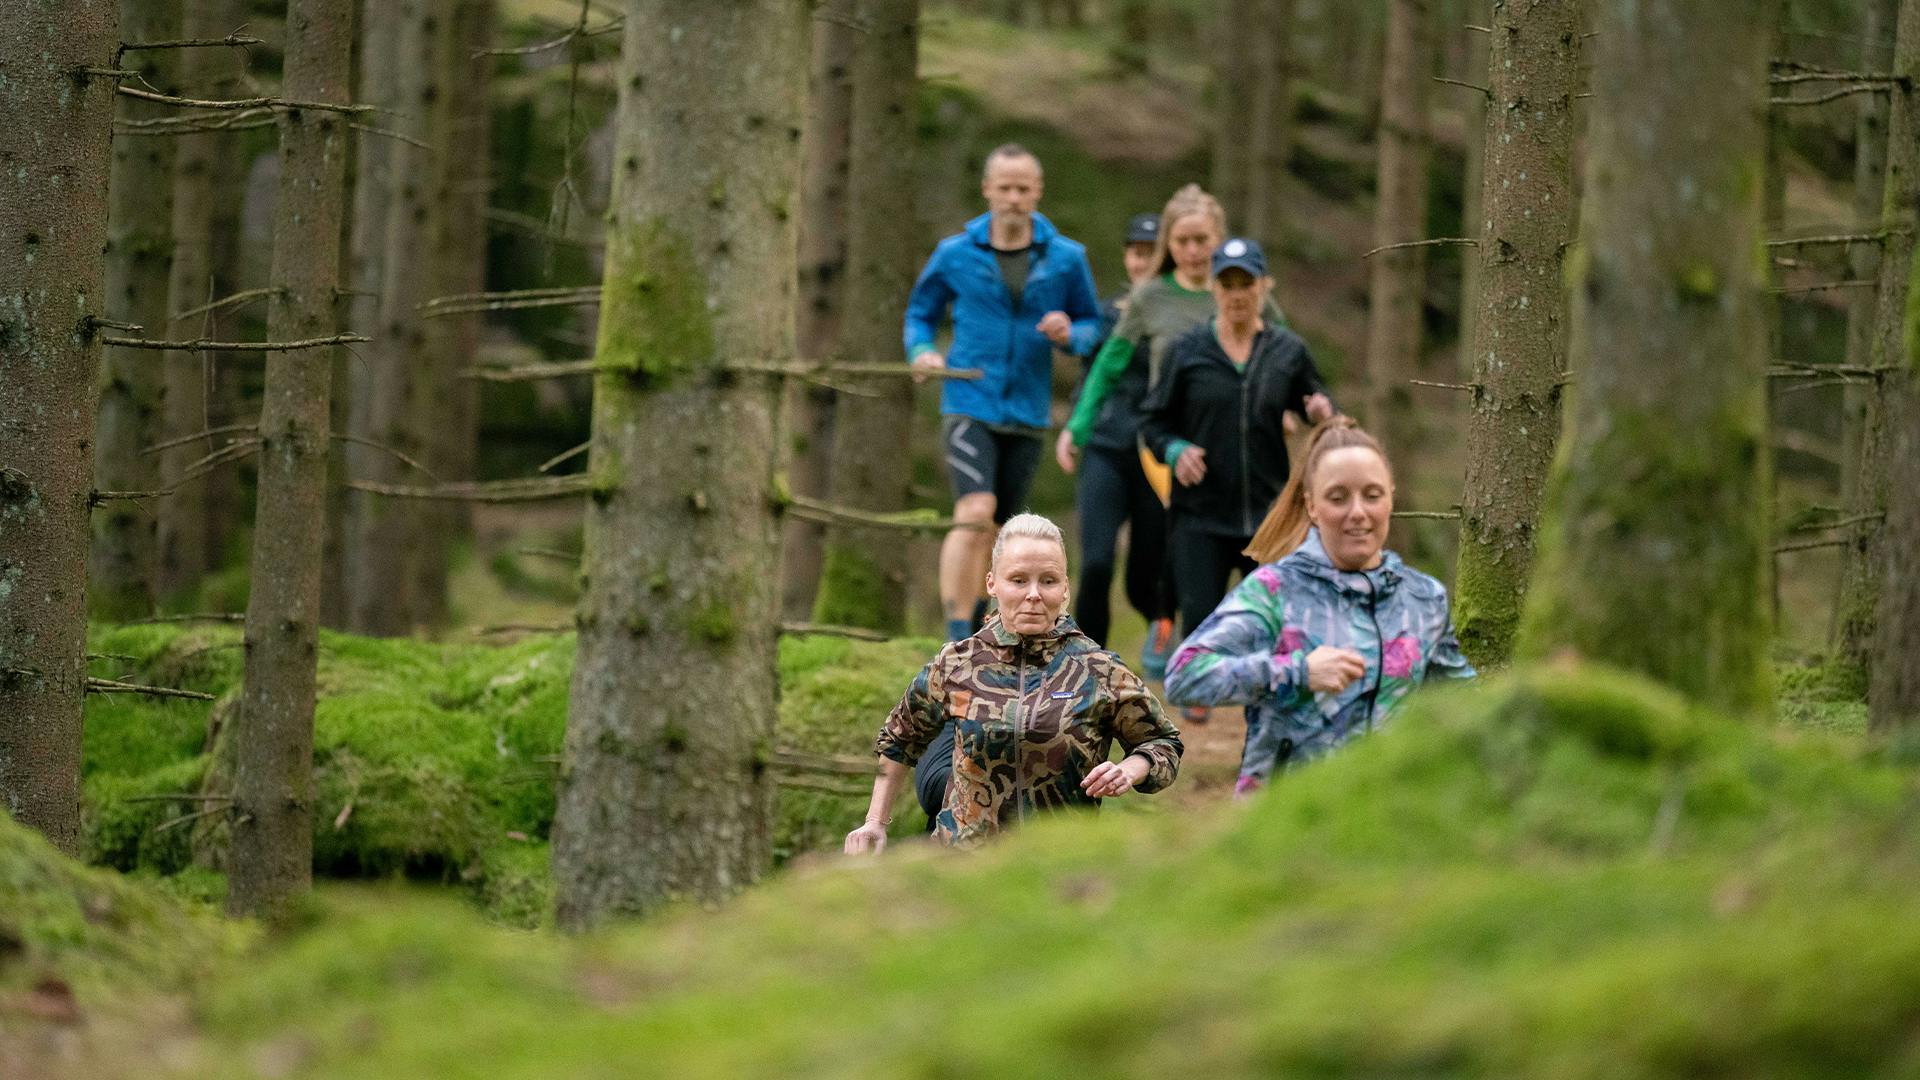 Icebug employees running in the forest